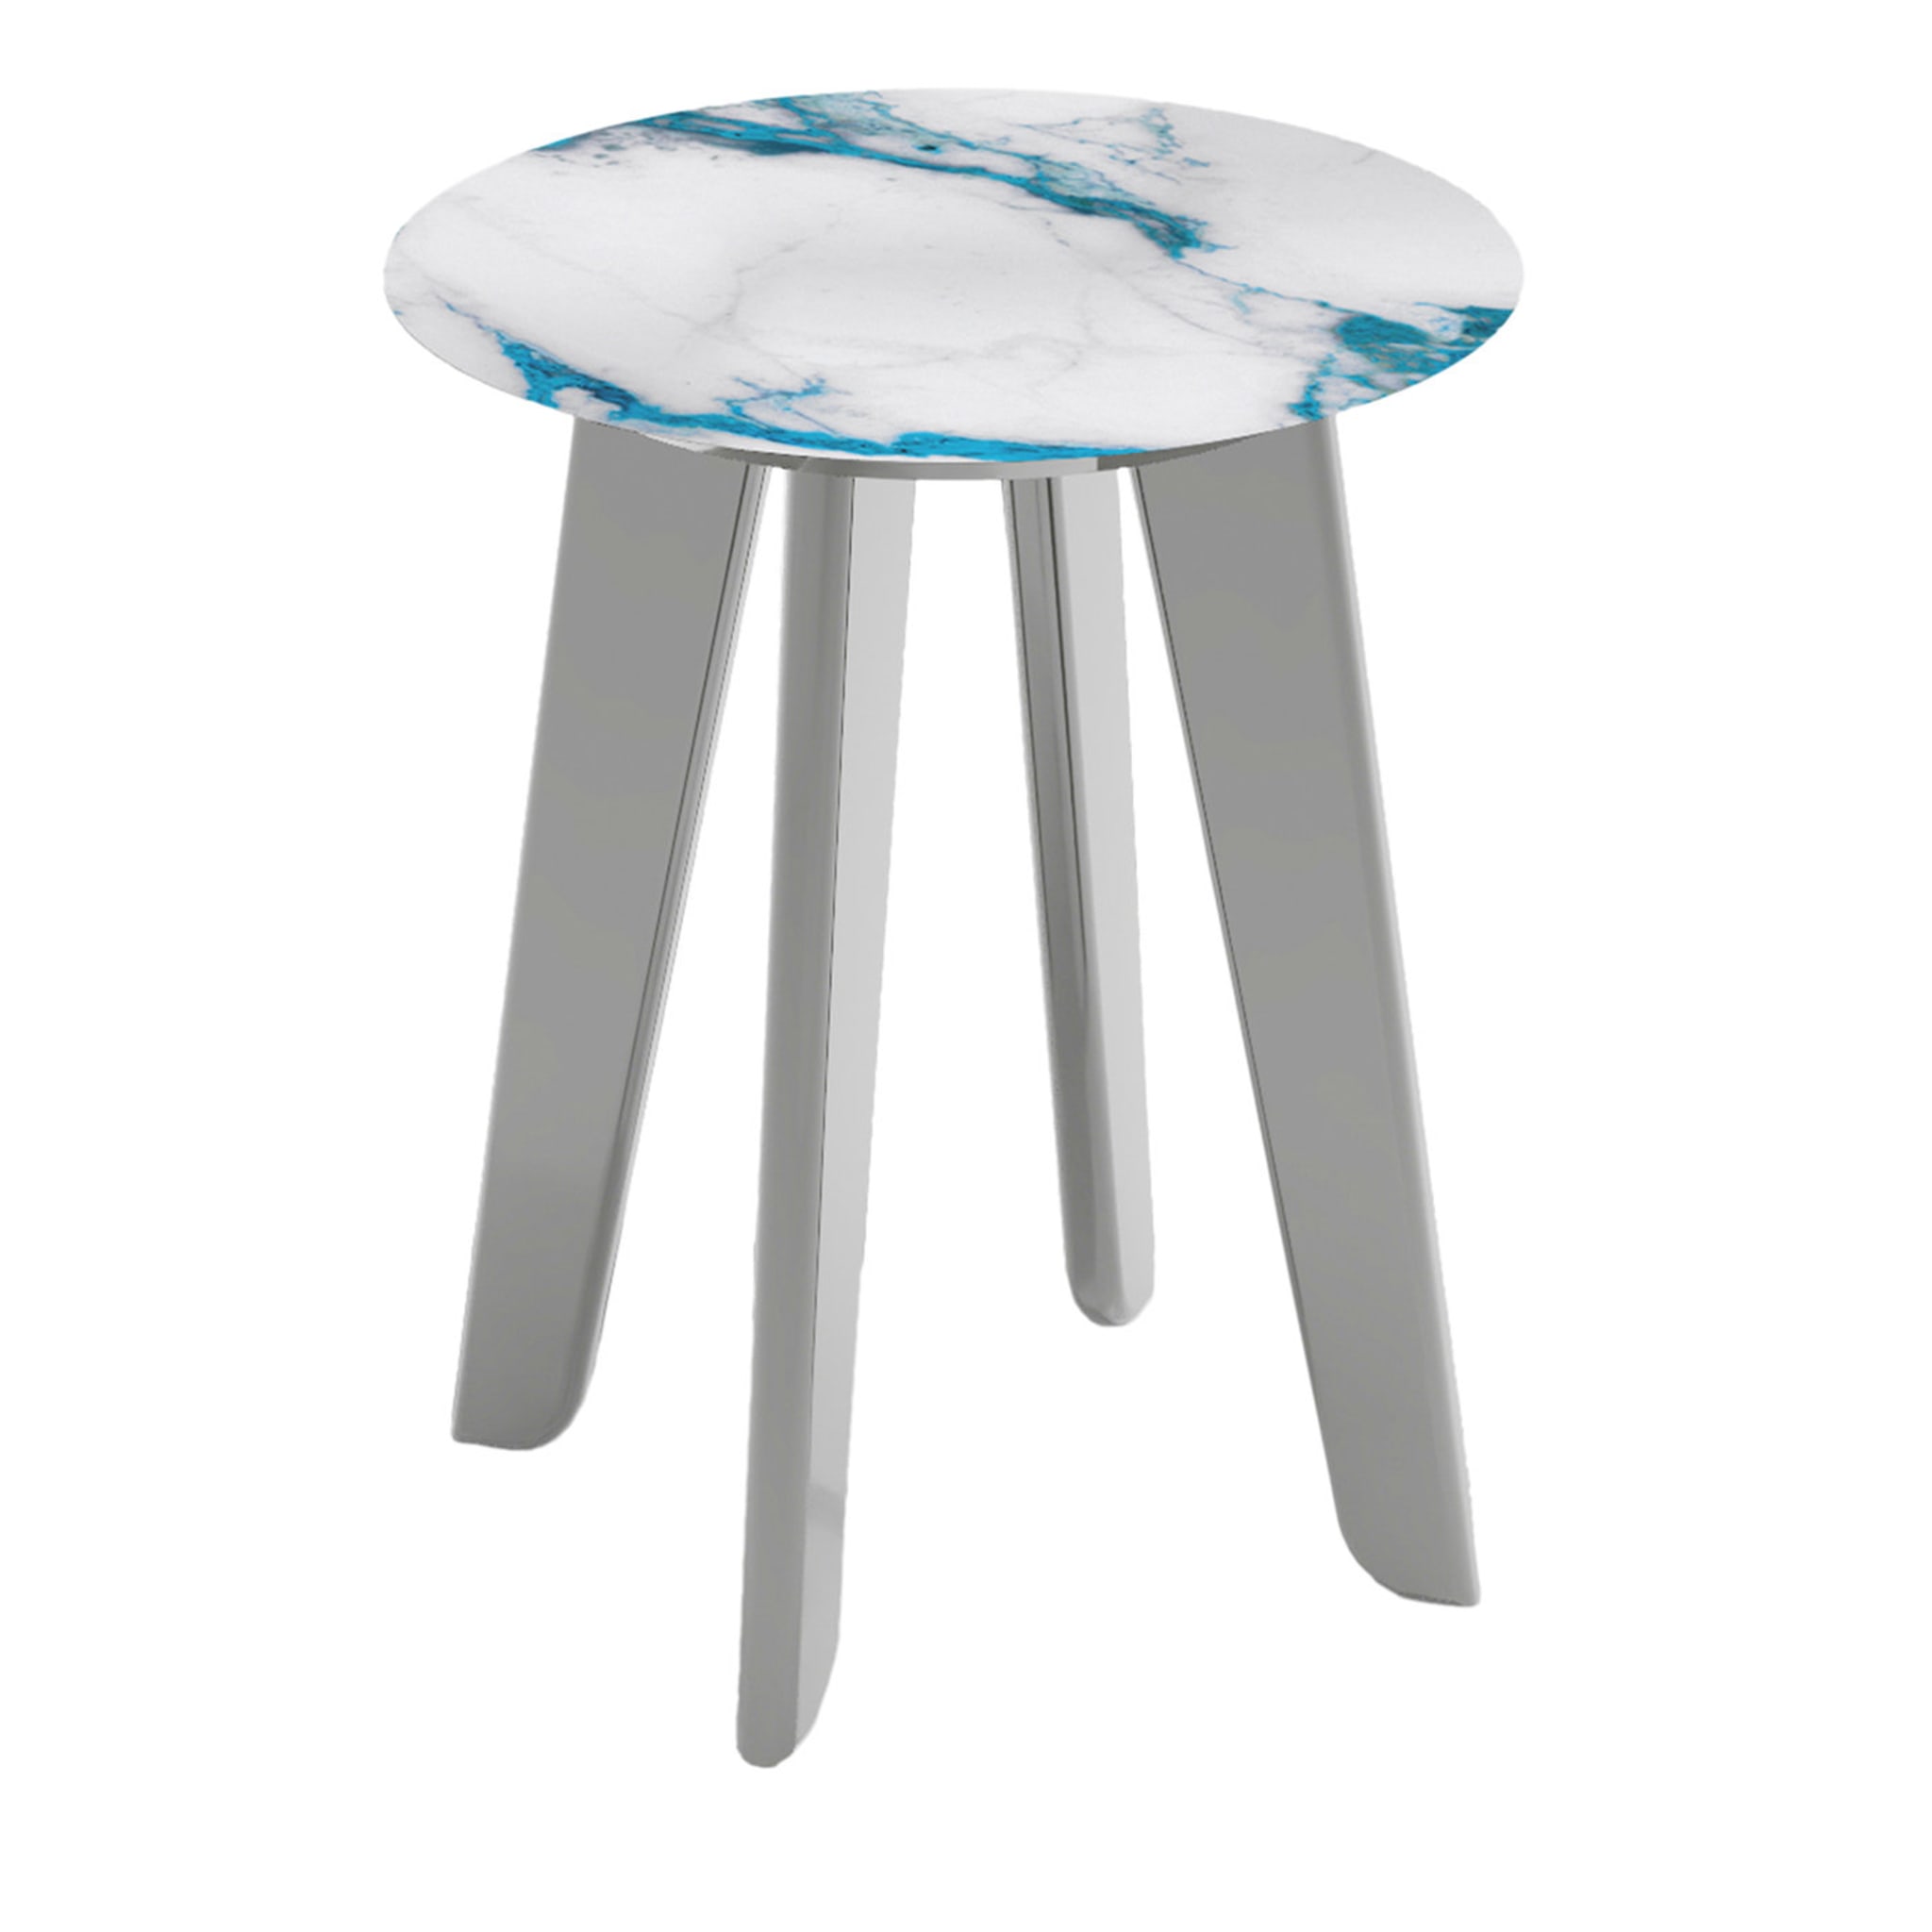 Owen Tall Round Side Table with White and Turquoise Top (Table d'appoint ronde haute avec plateau blanc et turquoise) - Vue principale